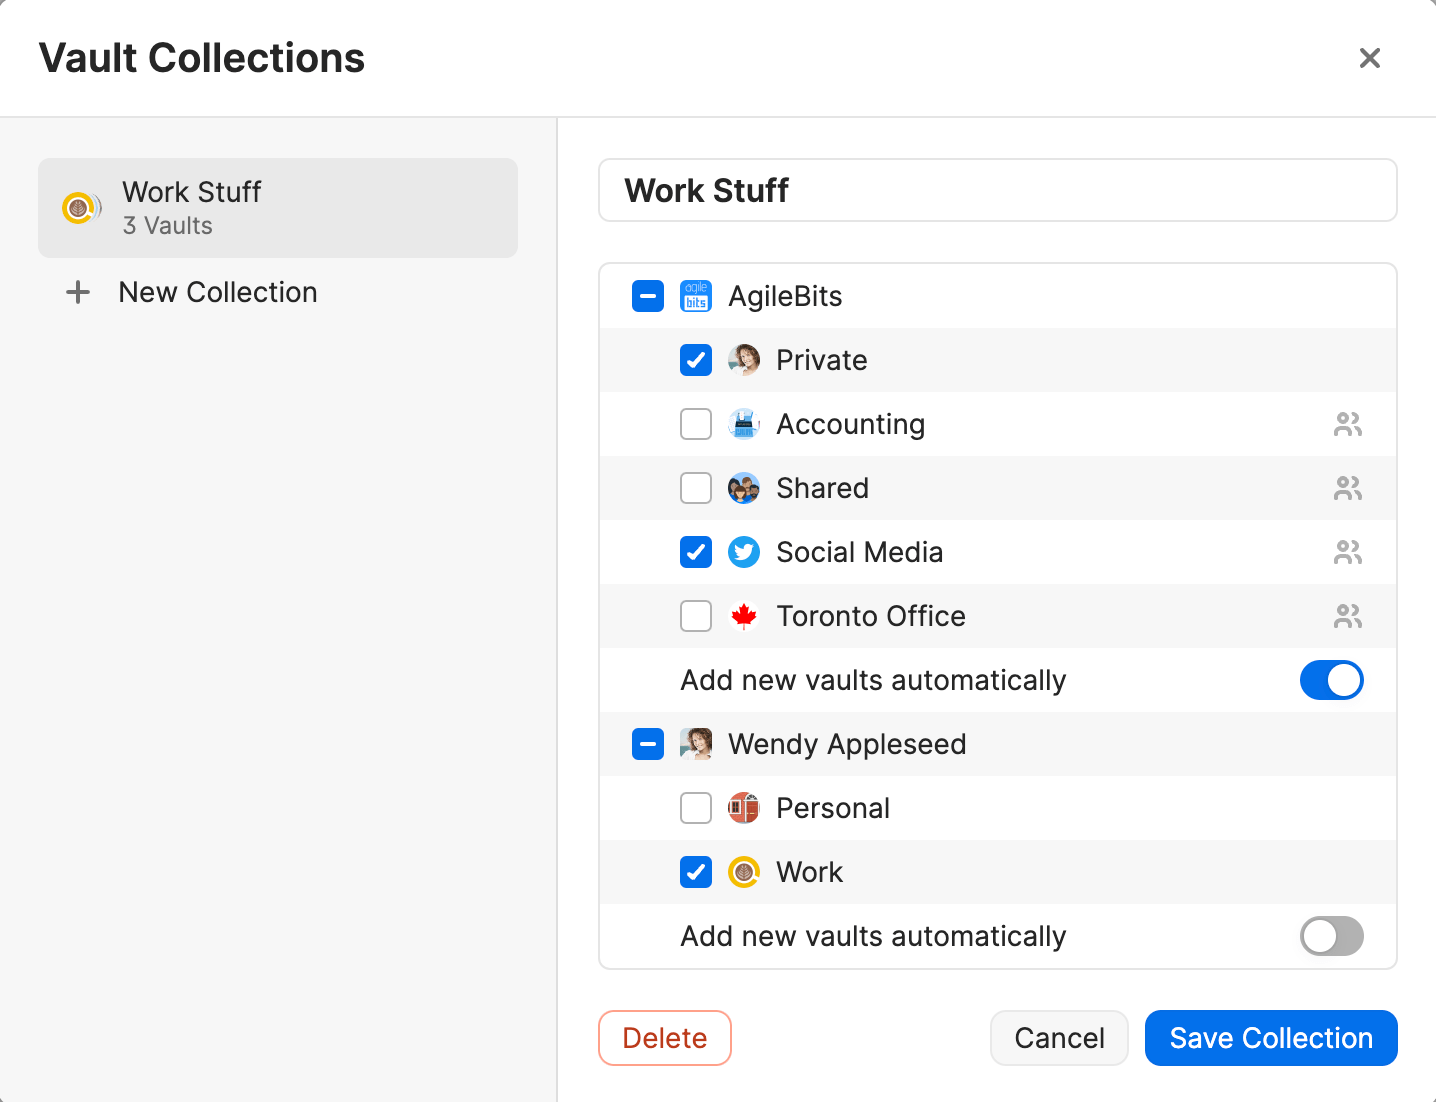 The Manage Collections window open with vaults selected to add to a Work Stuff collection.